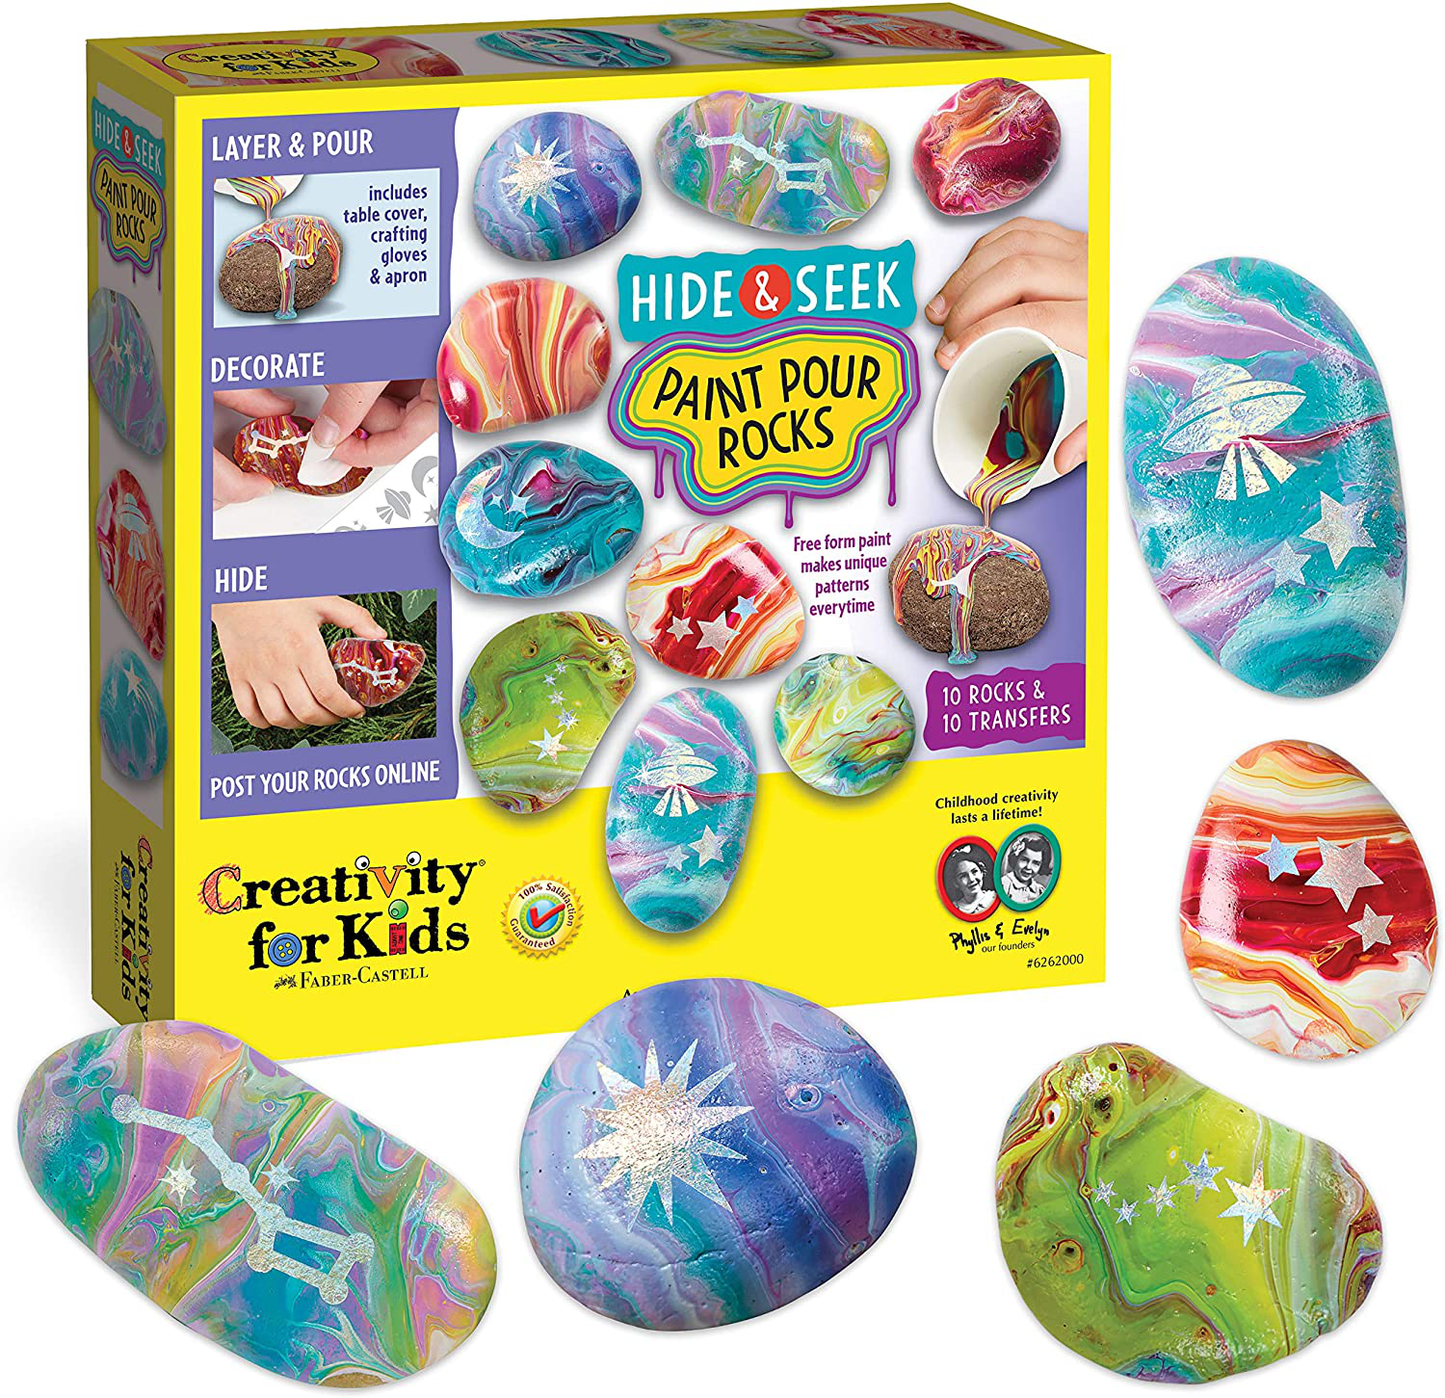 Creativity for Kids Rock Painting Kit - Paint 10 Rocks with Water Resistant Paint